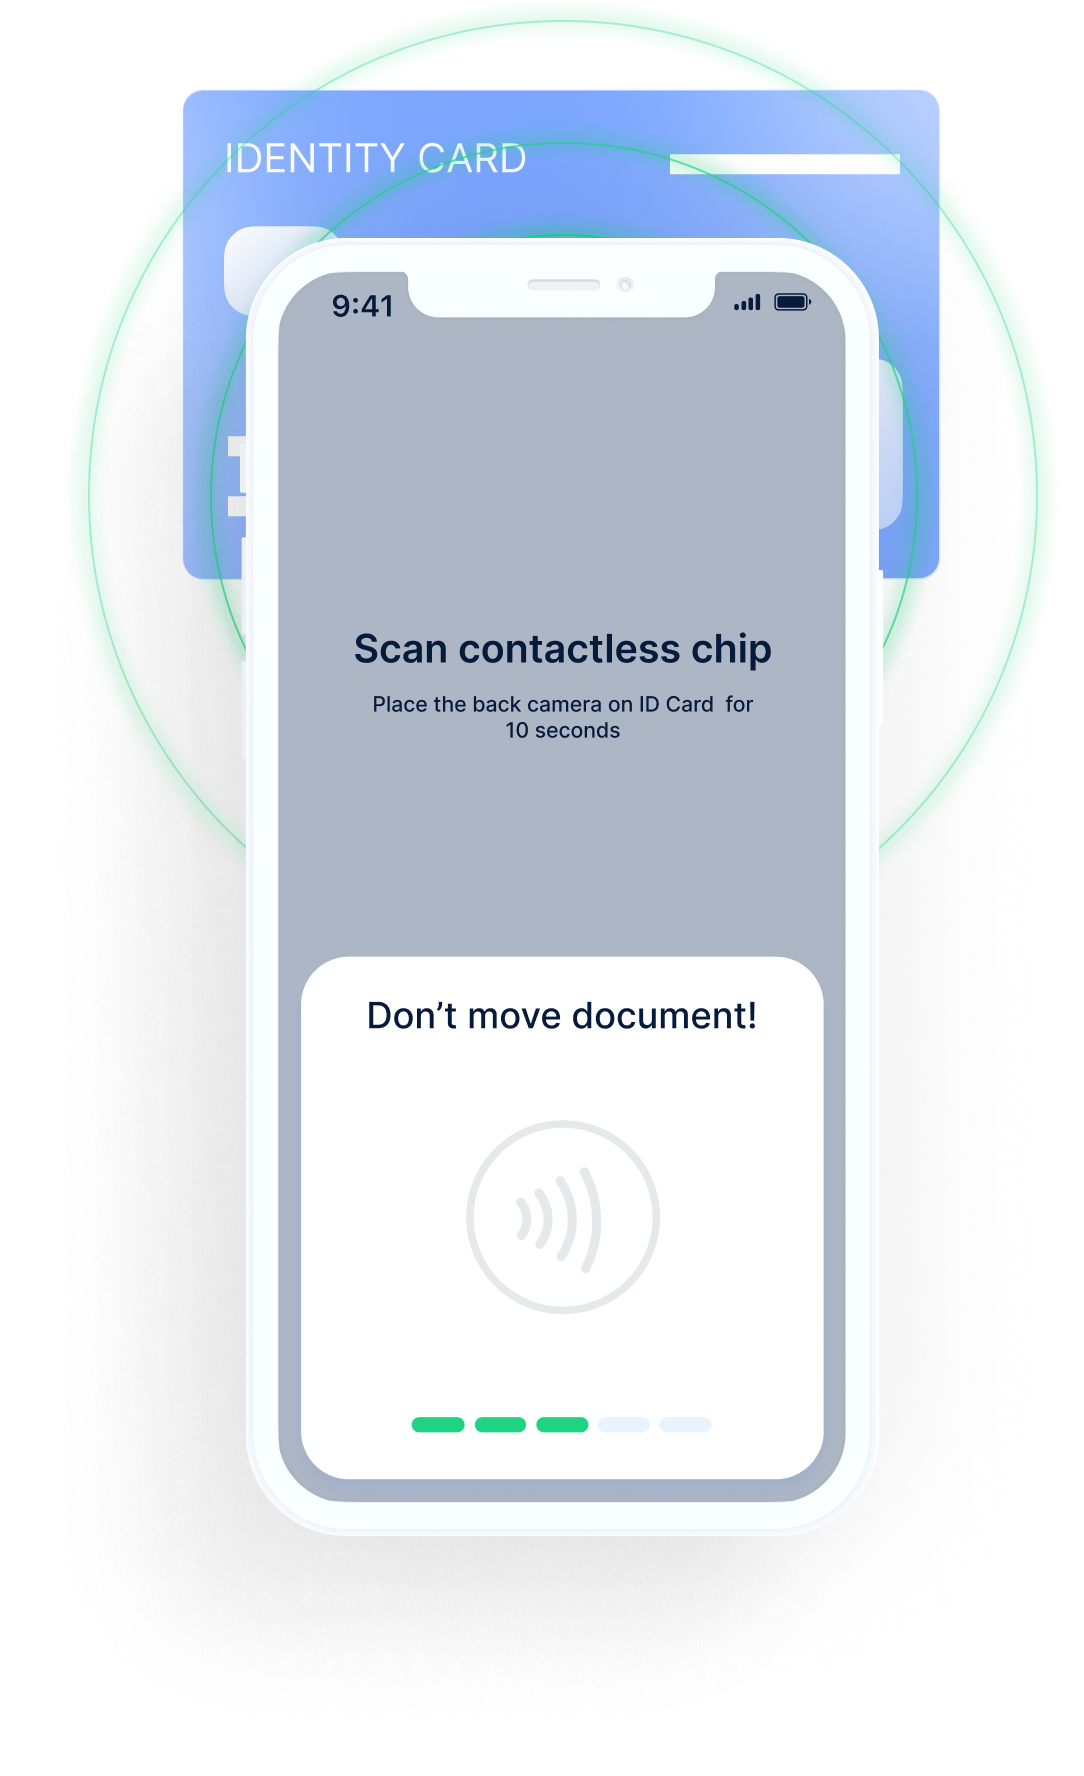 NFC scanning services